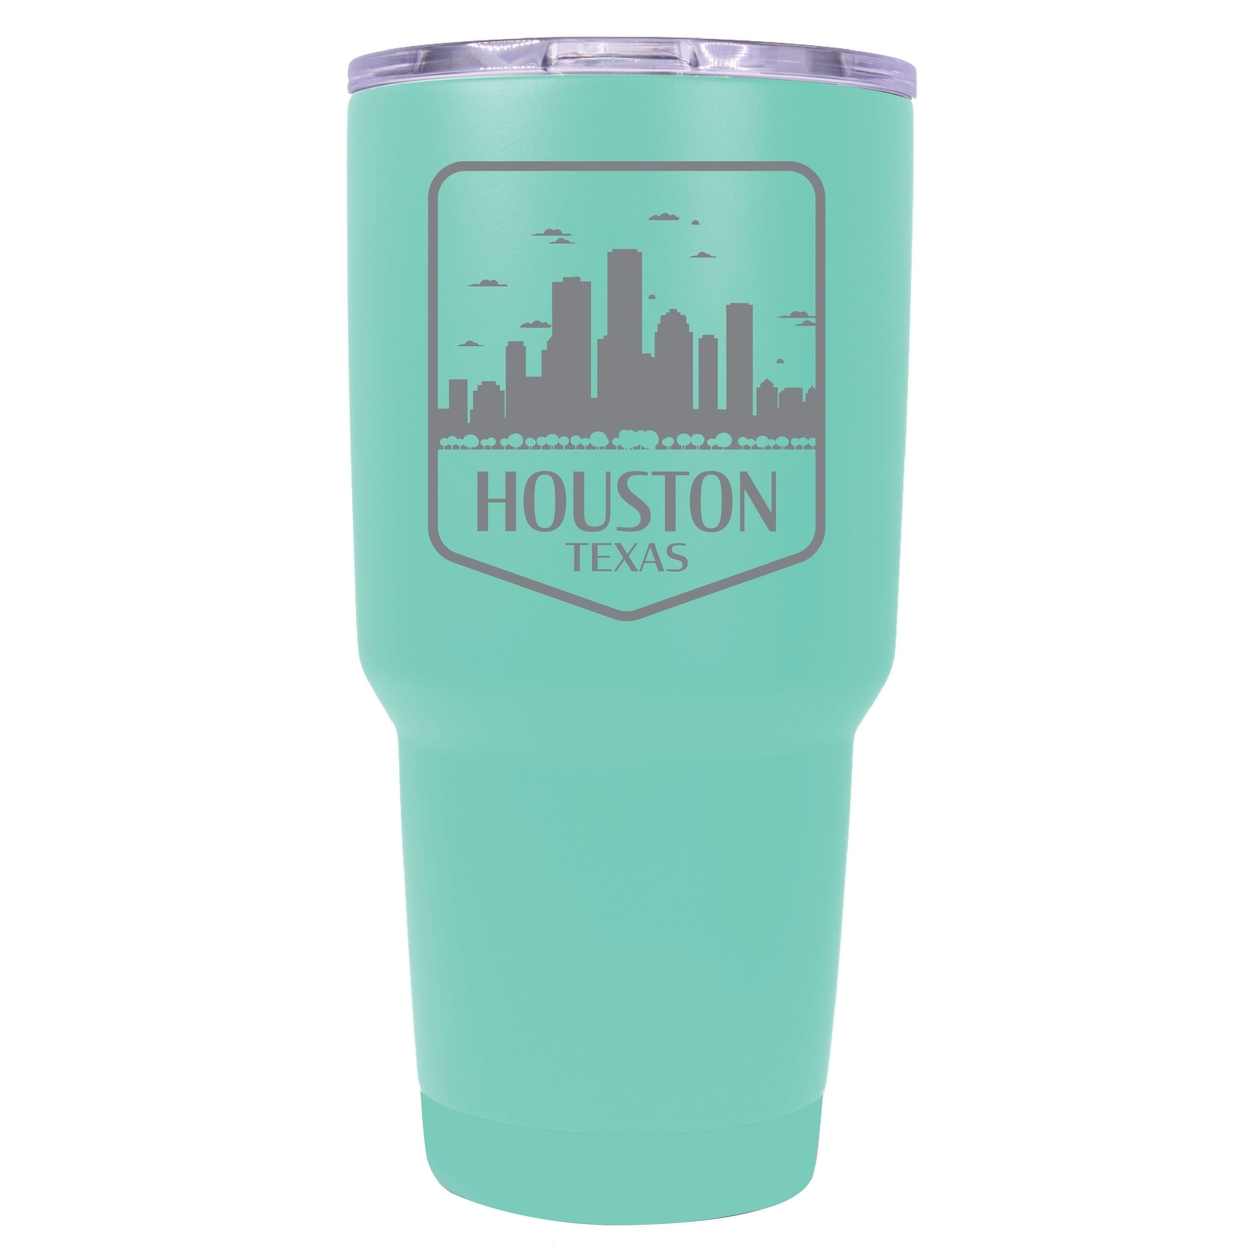 Houston Texas Souvenir 24 Oz Engraved Insulated Stainless Steel Tumbler - Red,,2-Pack